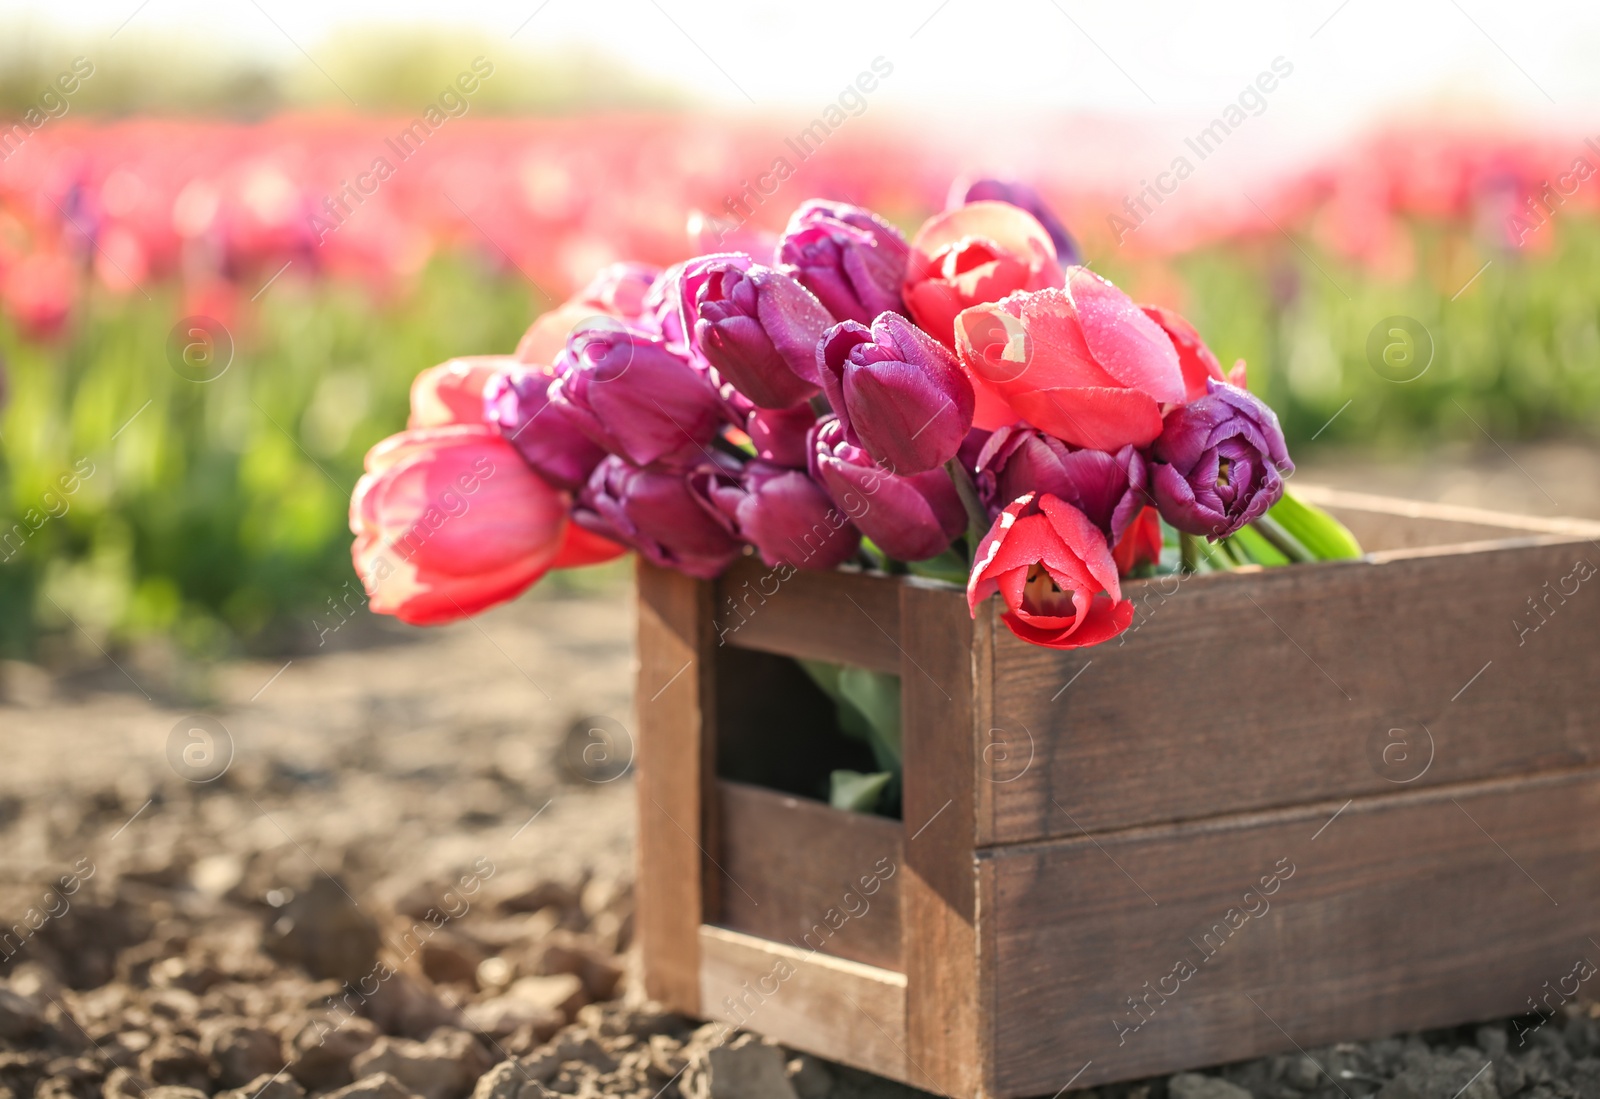 Photo of Wooden crate with blossoming tulips in field on sunny spring day